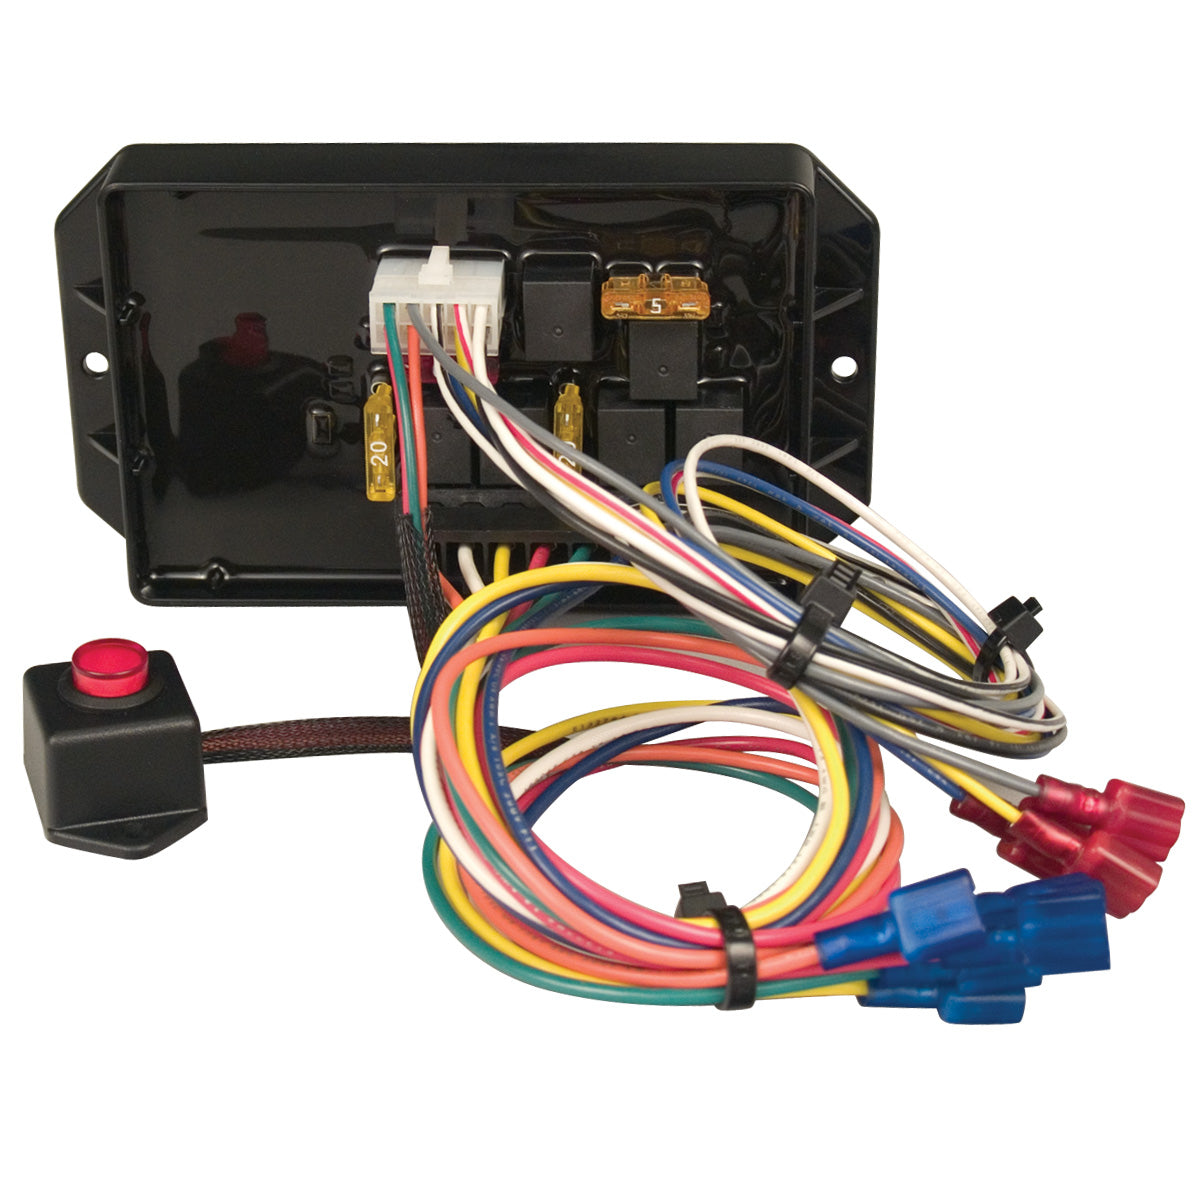 SoundOff Signal Ignition Security System